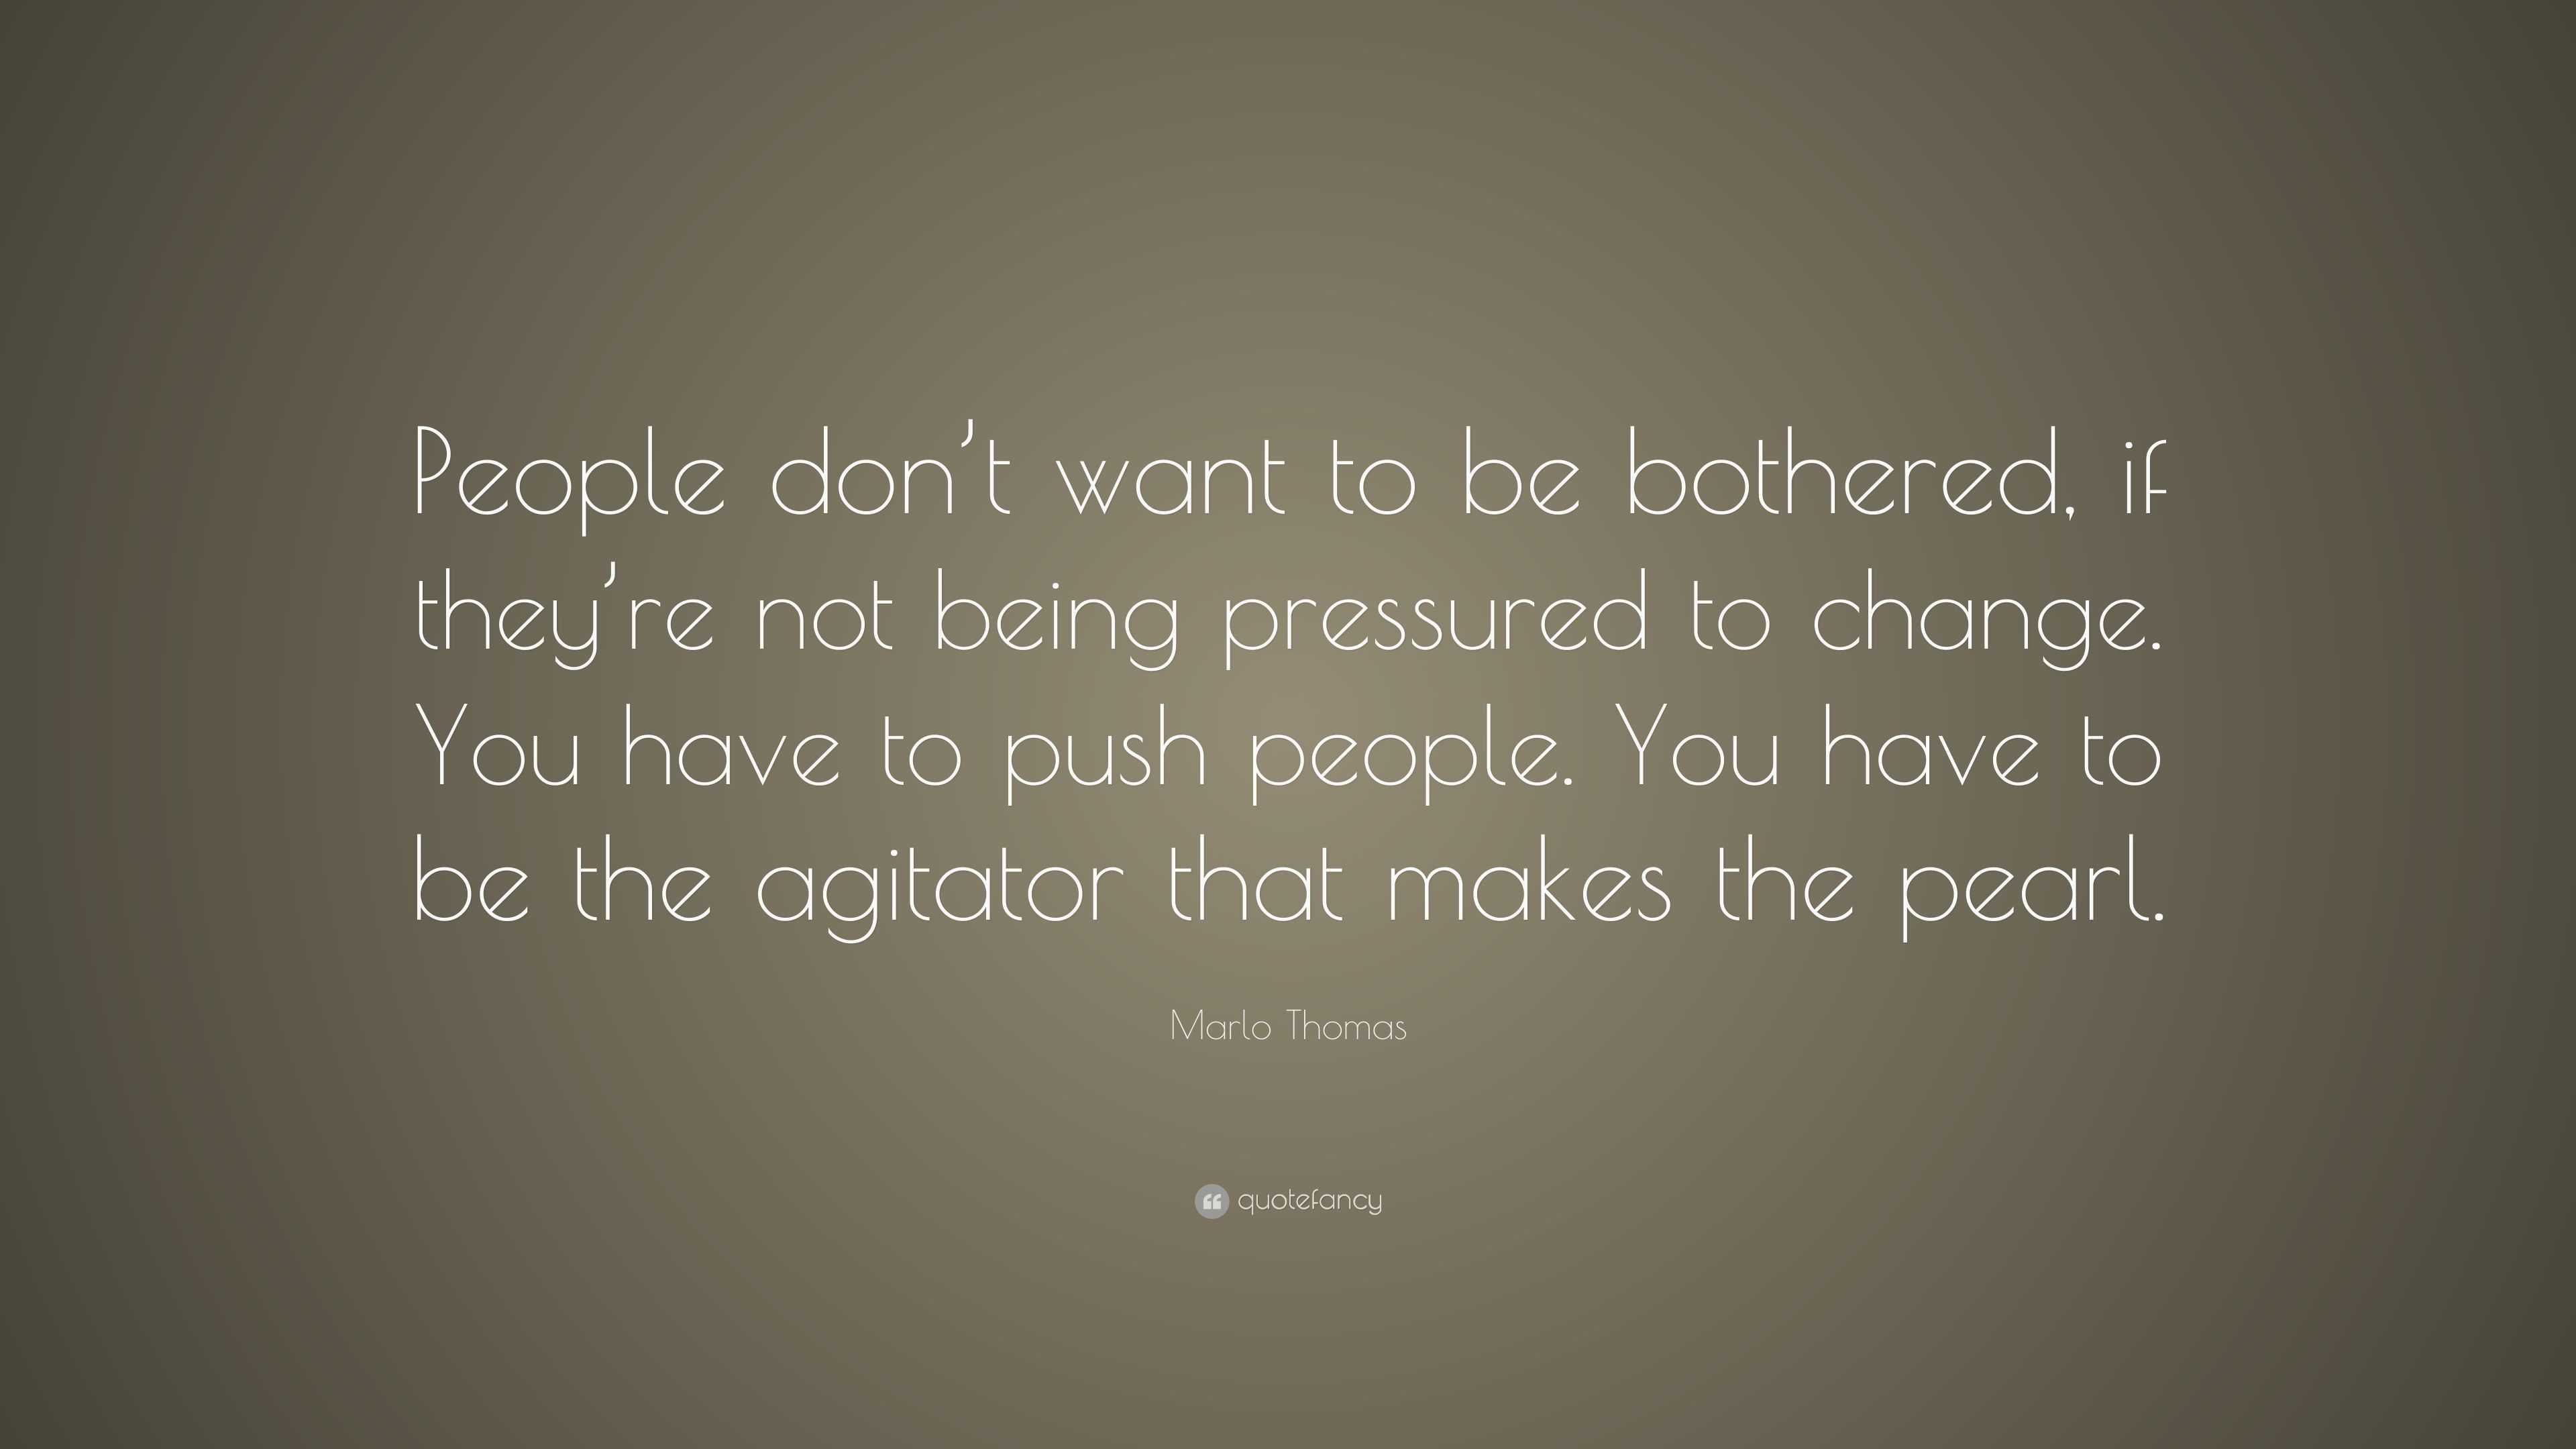 Marlo Thomas Quote: “People don’t want to be bothered, if they’re not ...